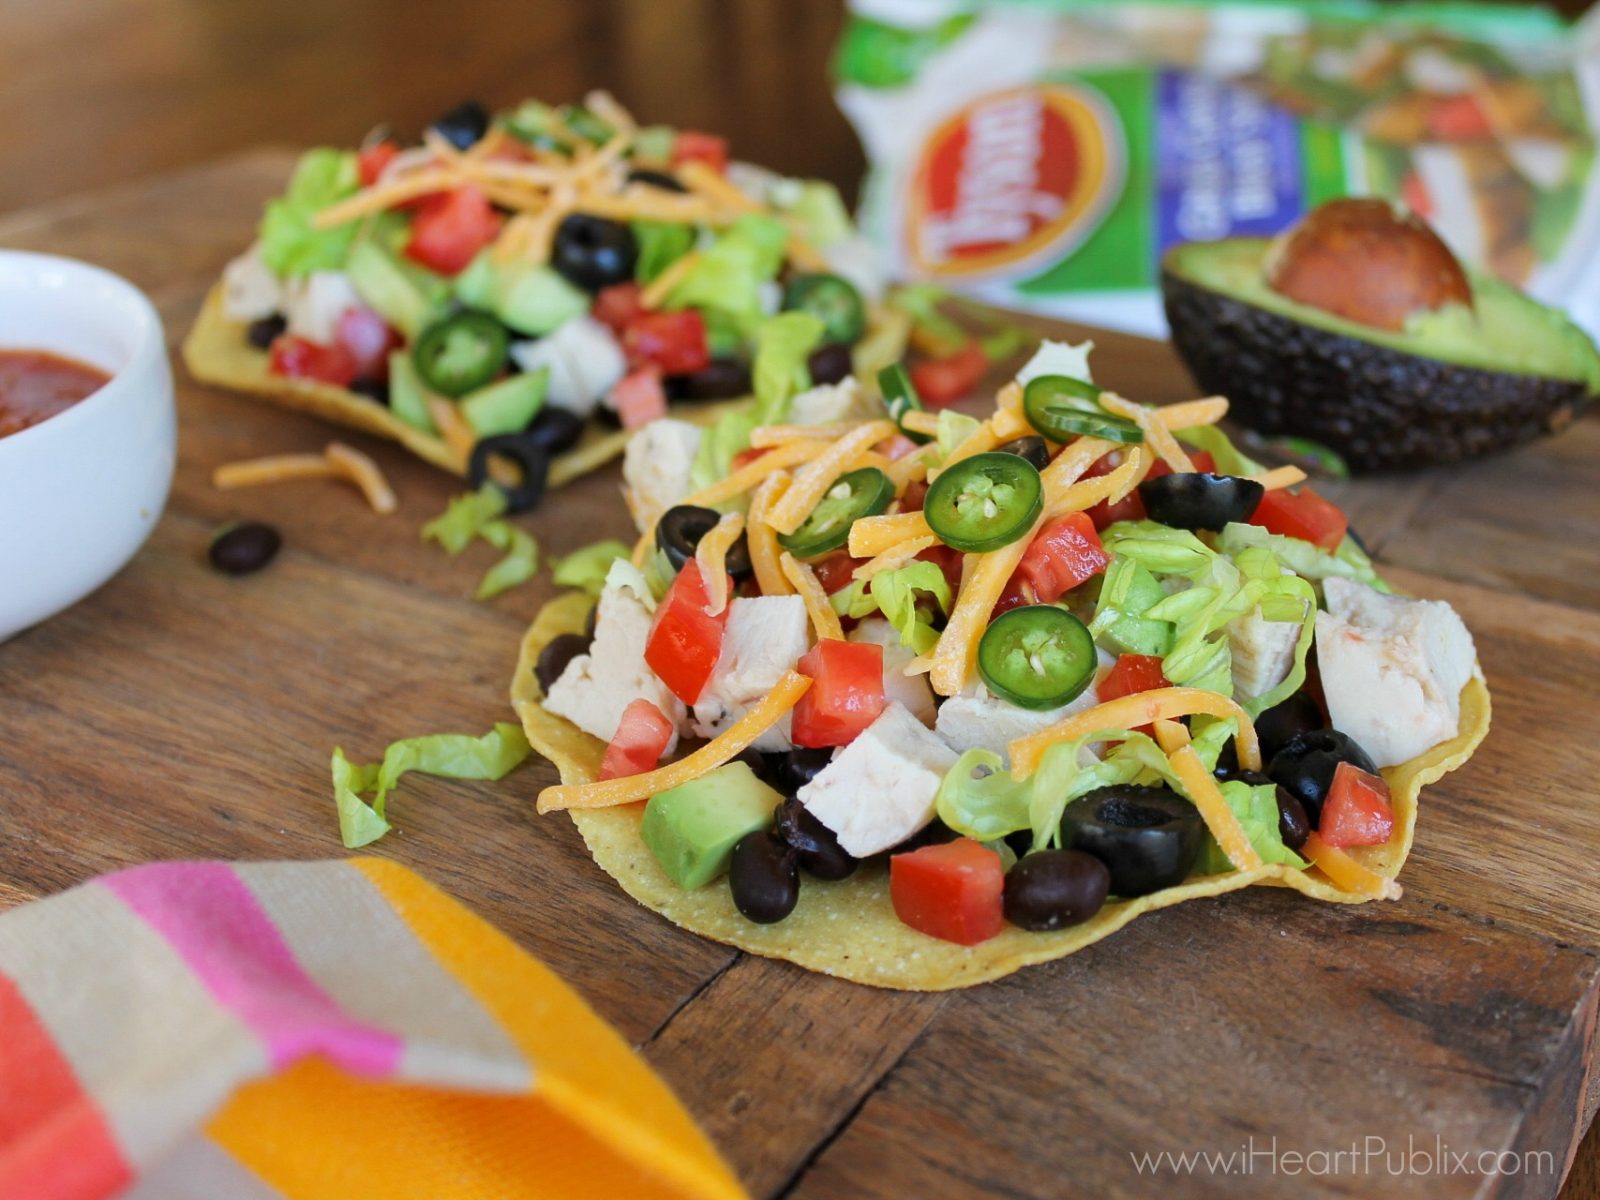 Big Savings On Hillshire Farm® Lunchmeat & Tyson® Refrigerated Fully Cooked Chicken – Try My Easy Chicken Tostadas!